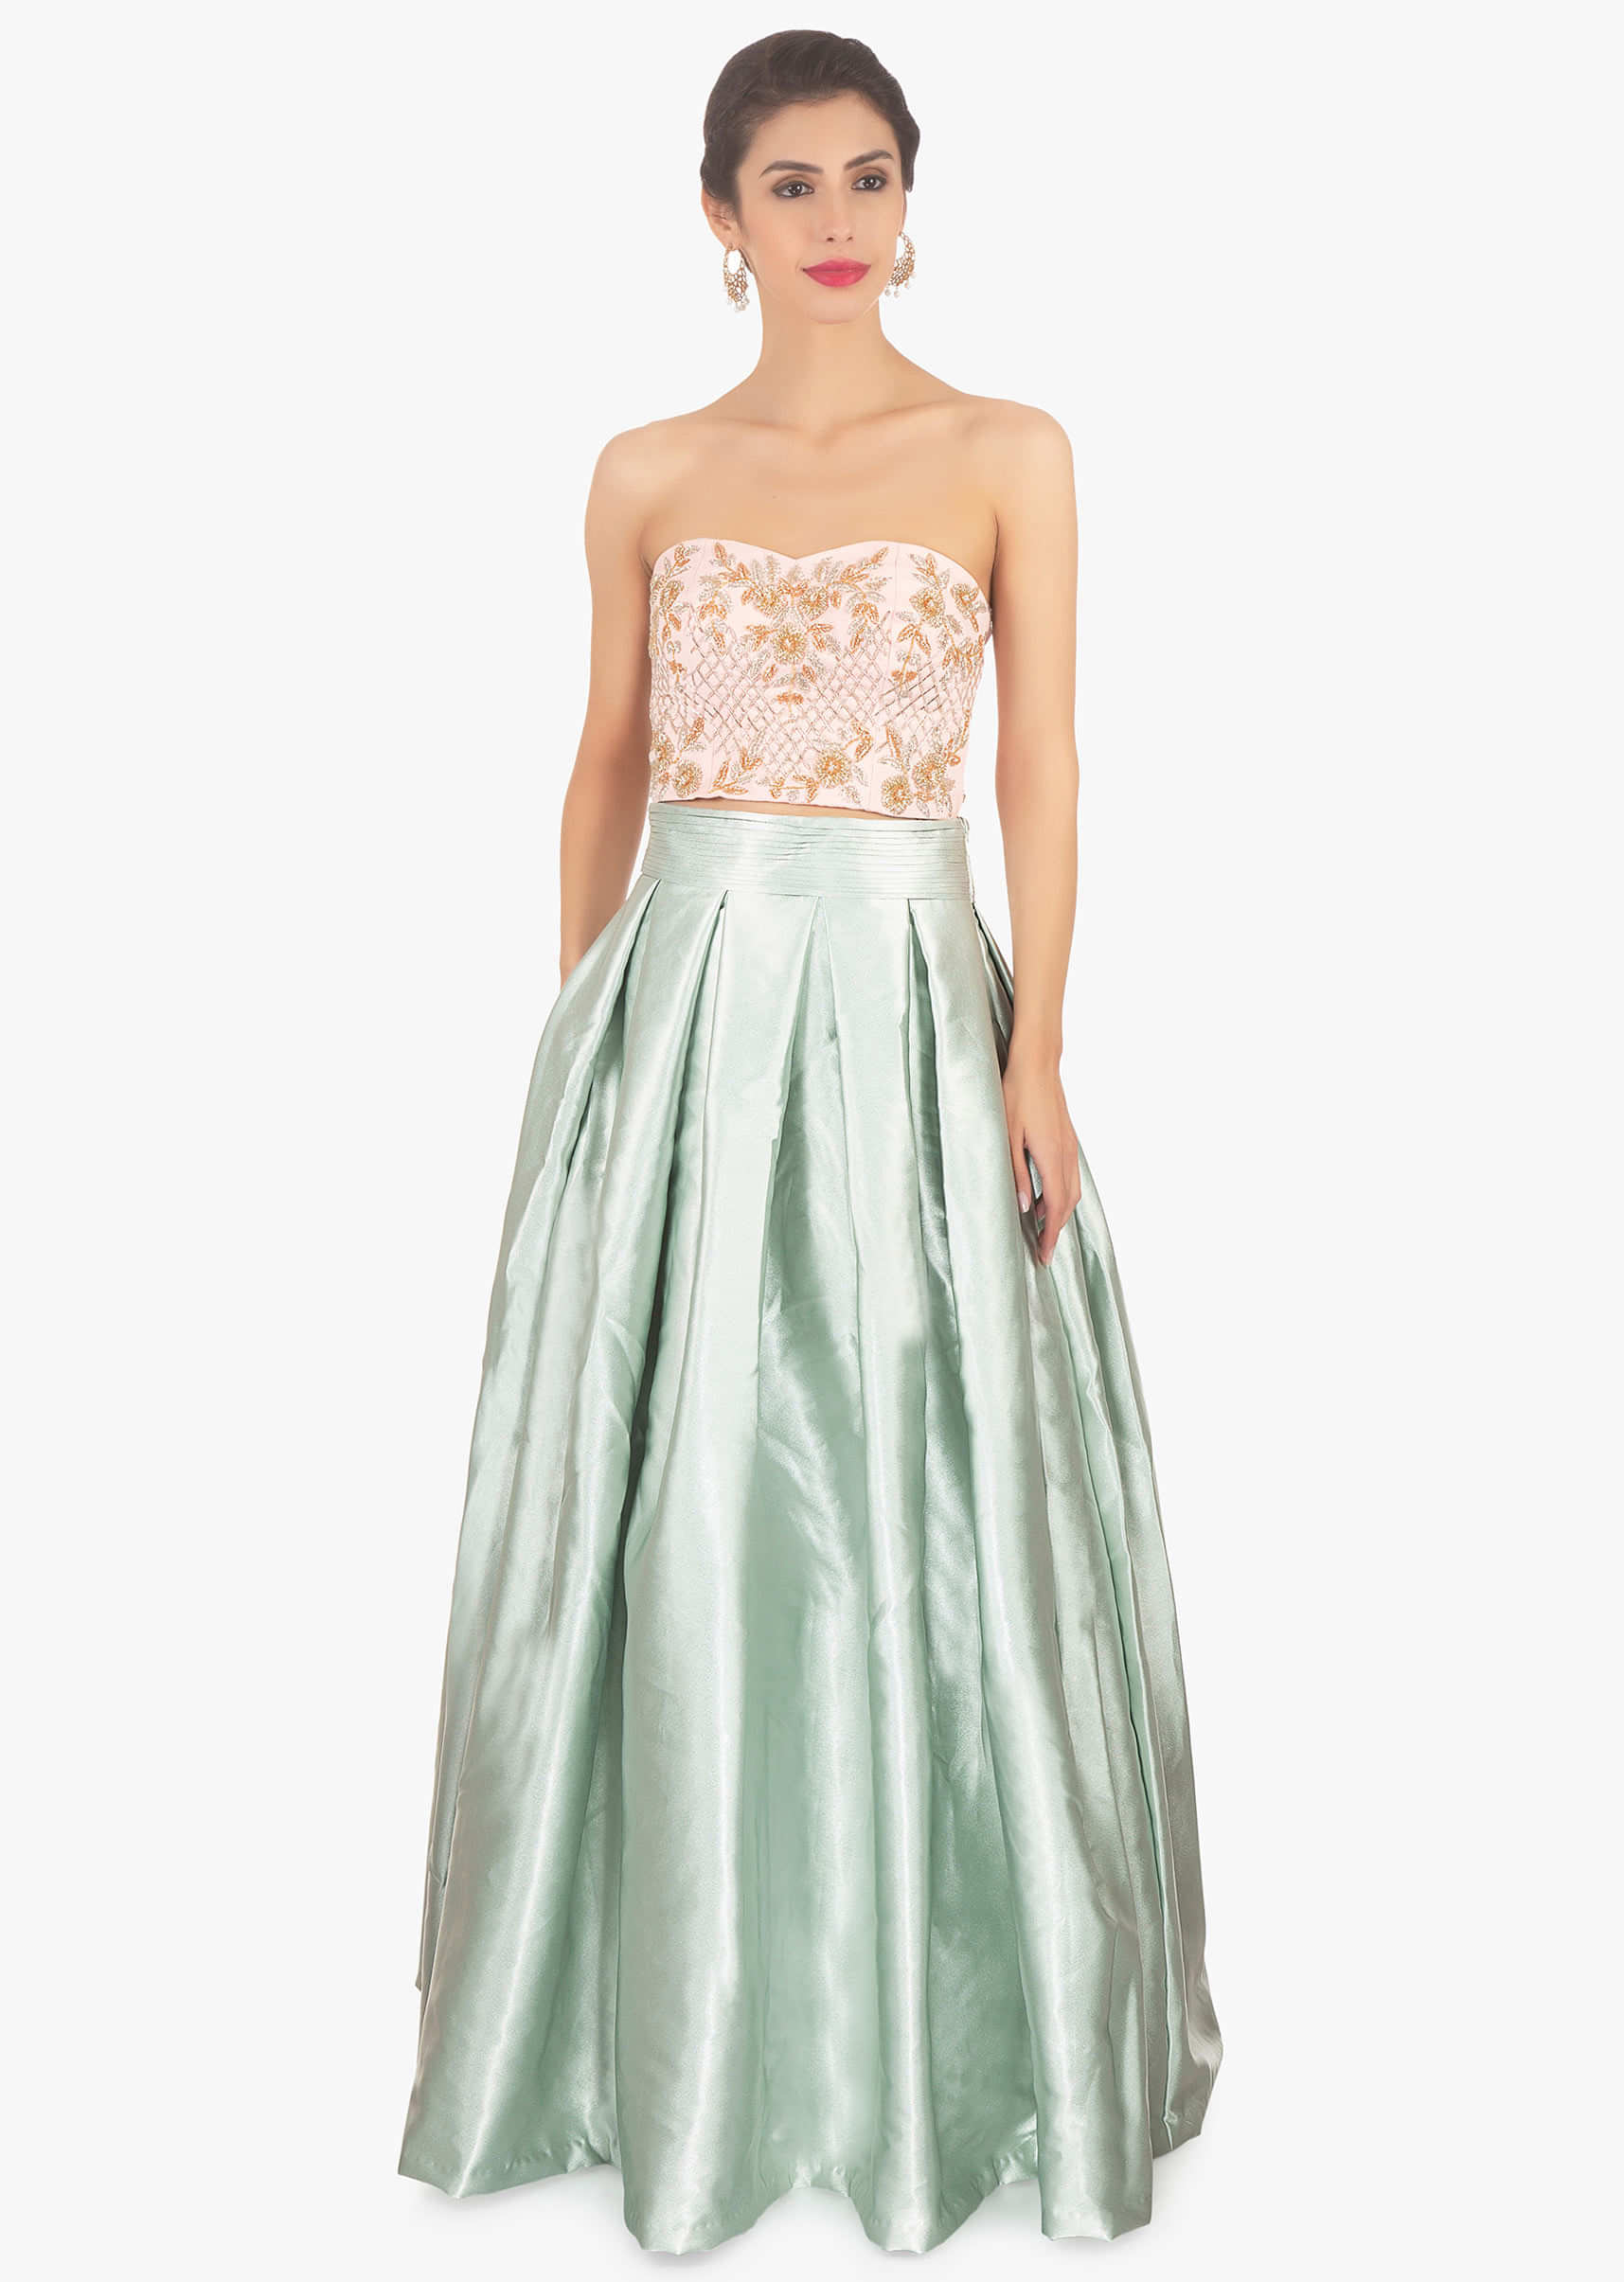 Pista green skirt paired with a strapless crop top and pink organza jacket